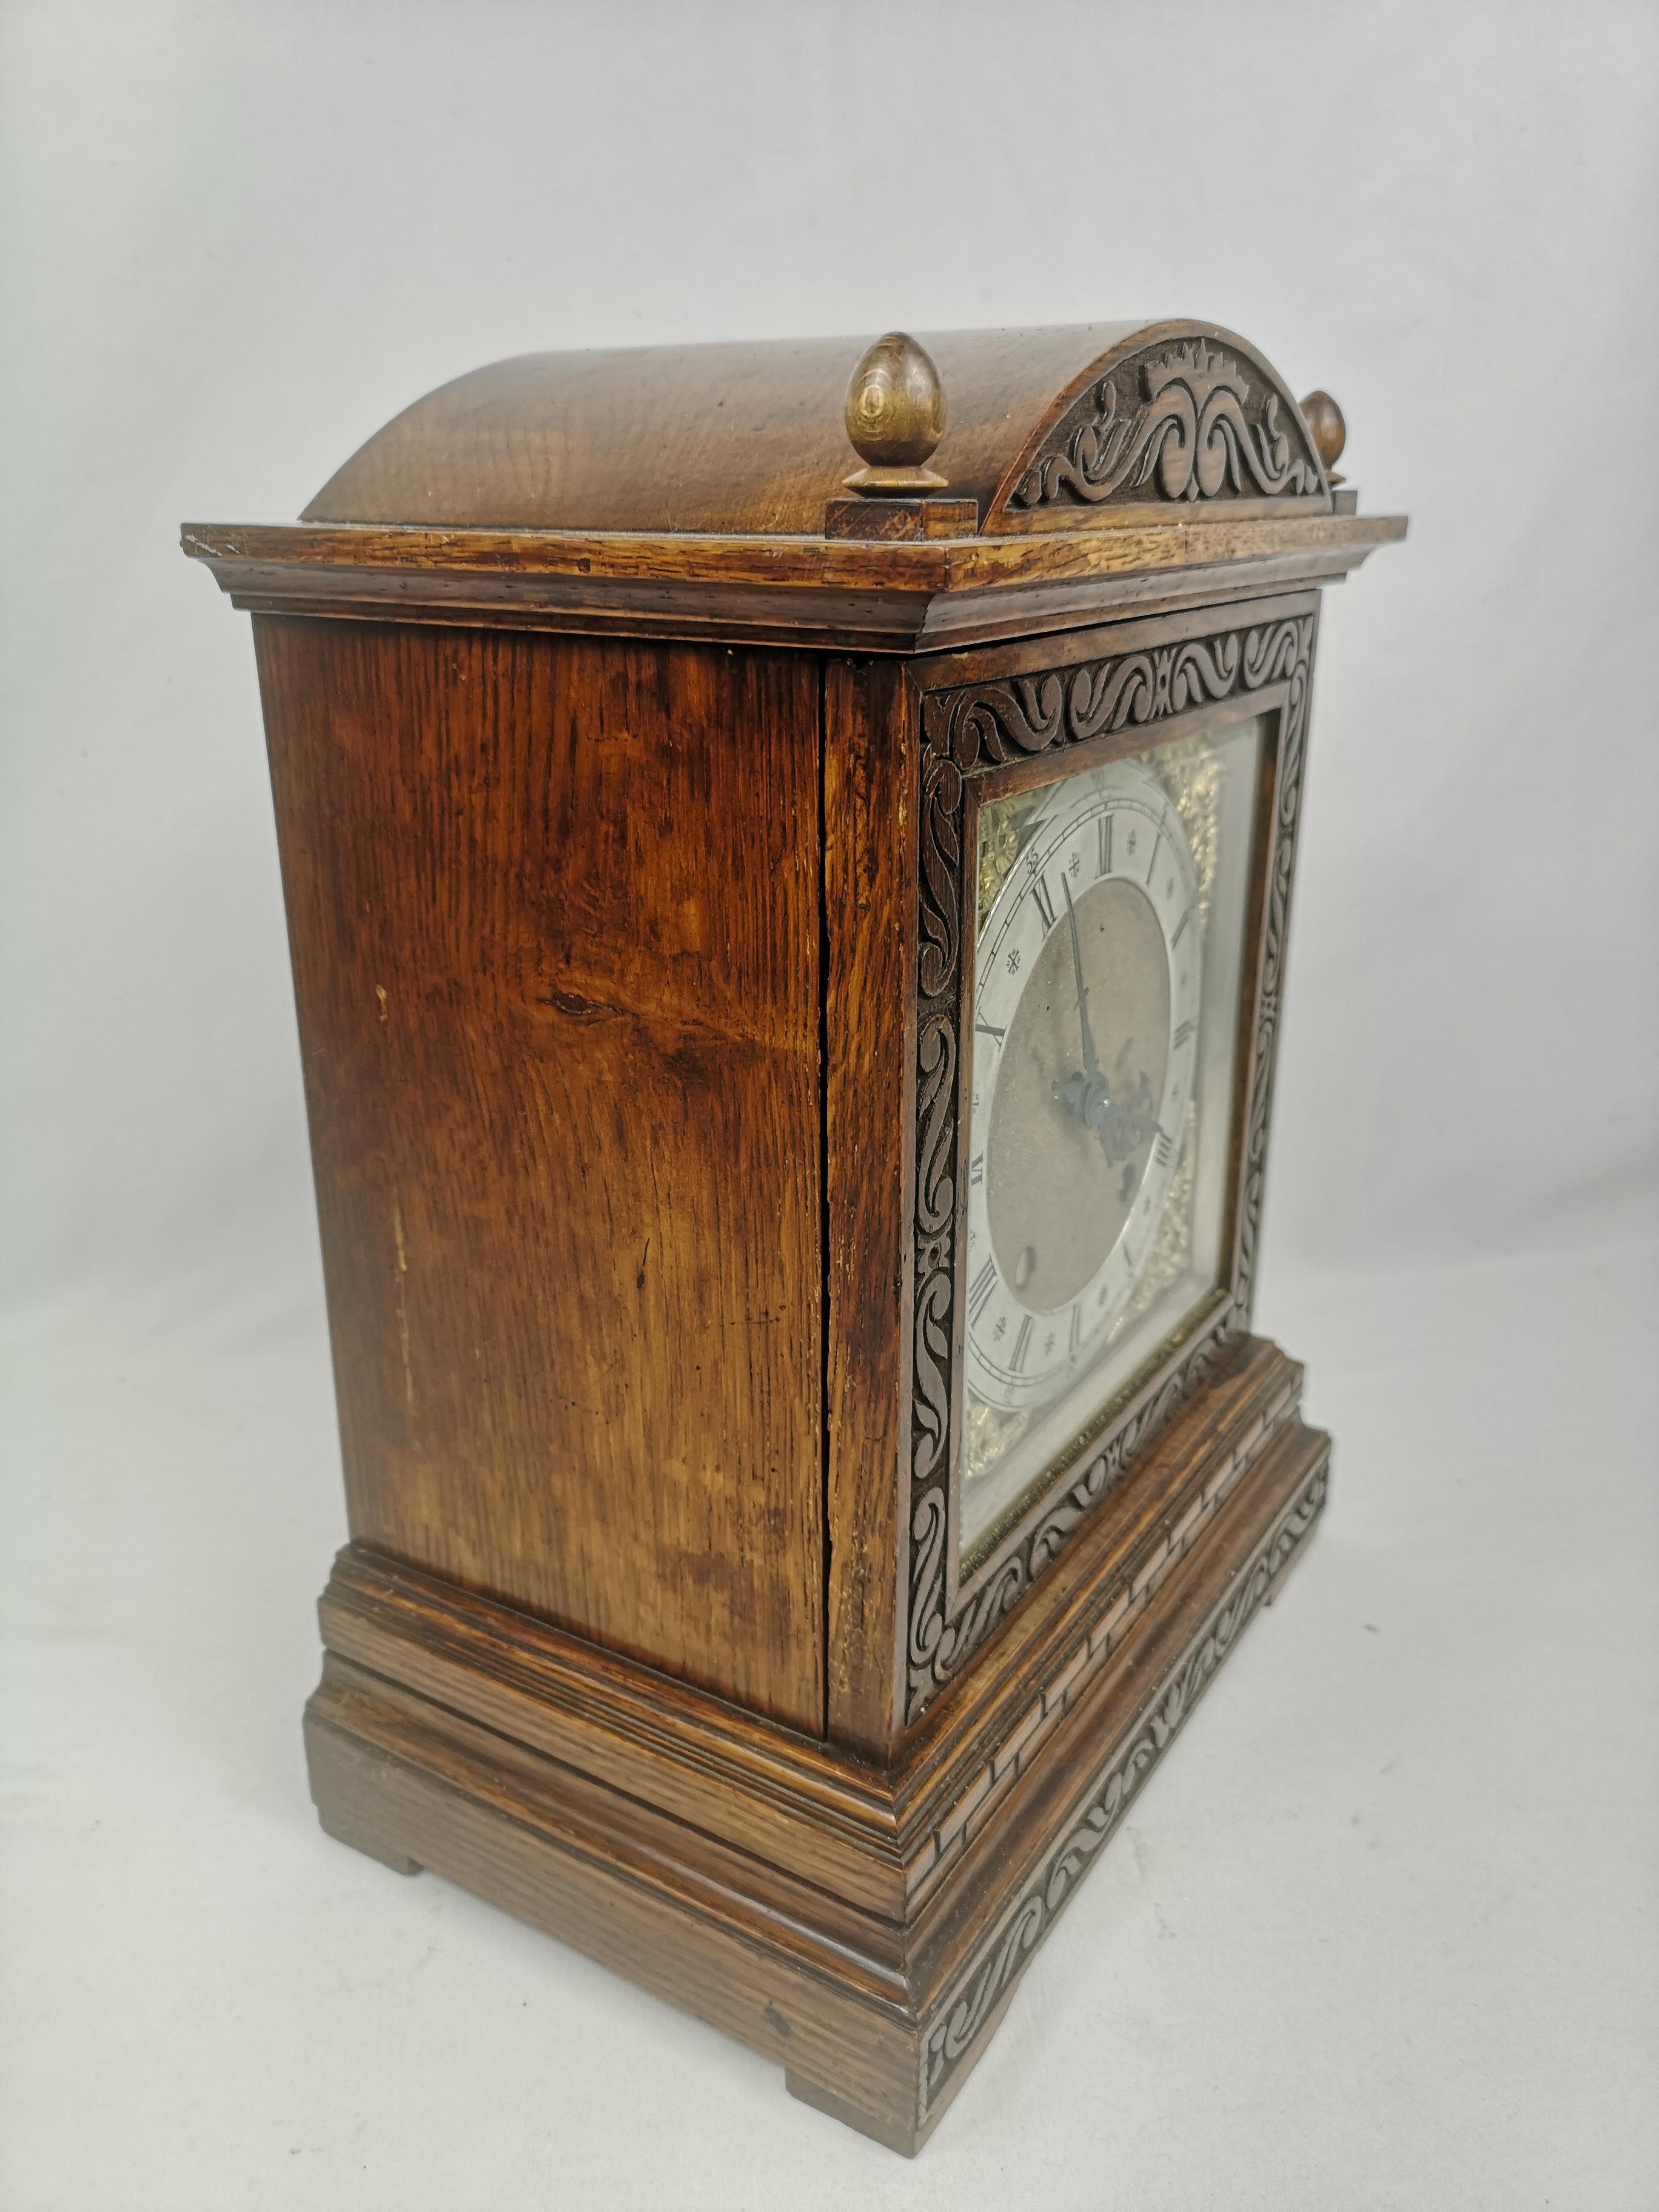 Oak cased mantel clock with brass face - Image 3 of 6